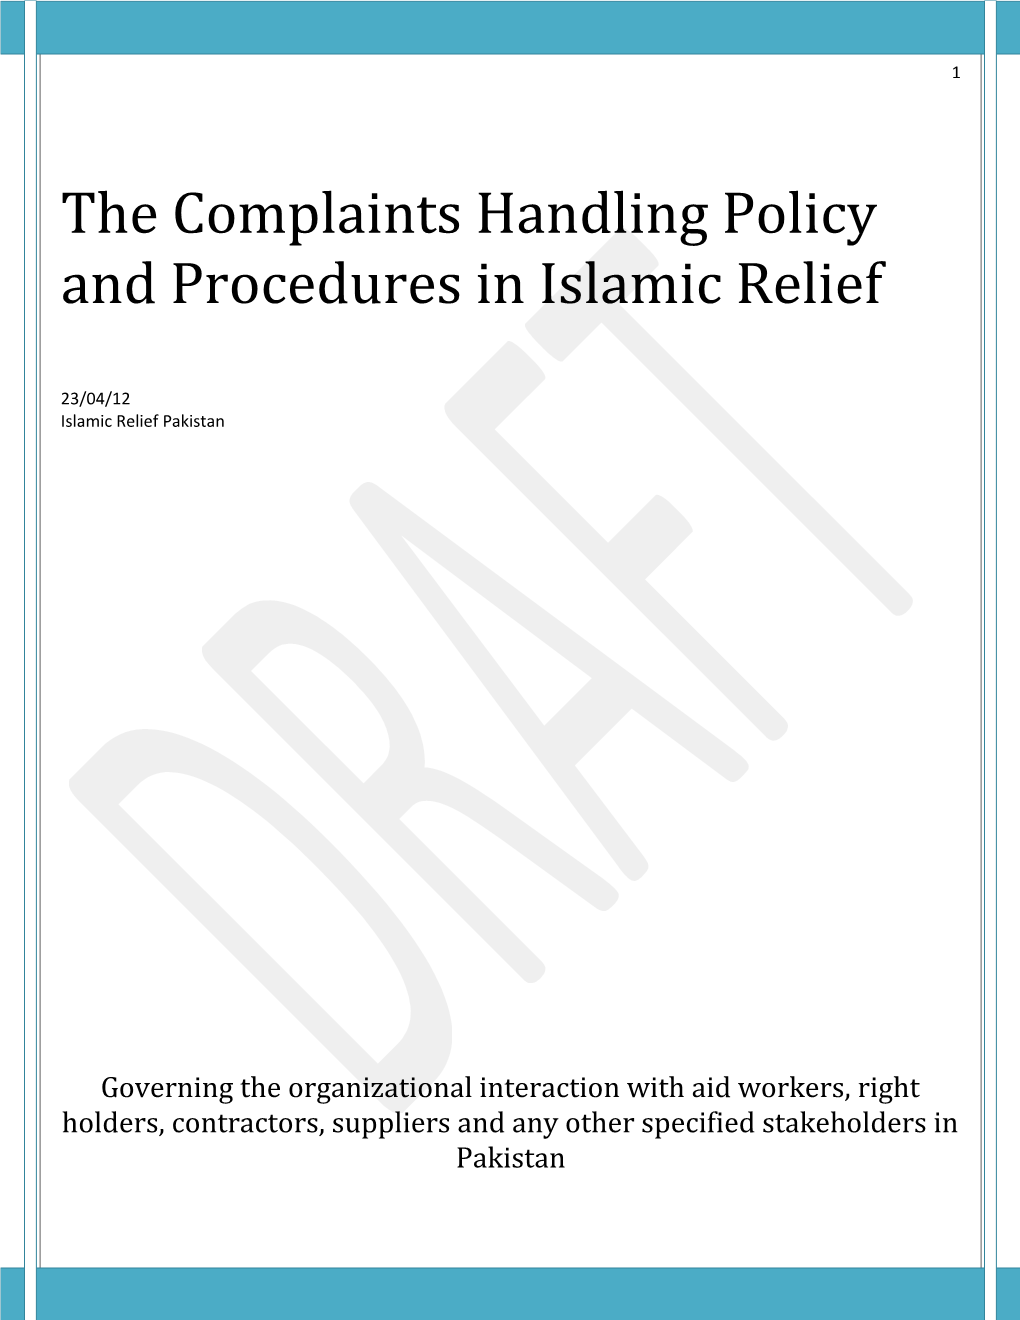 Complaints Handling Policy and Procedures in IRP